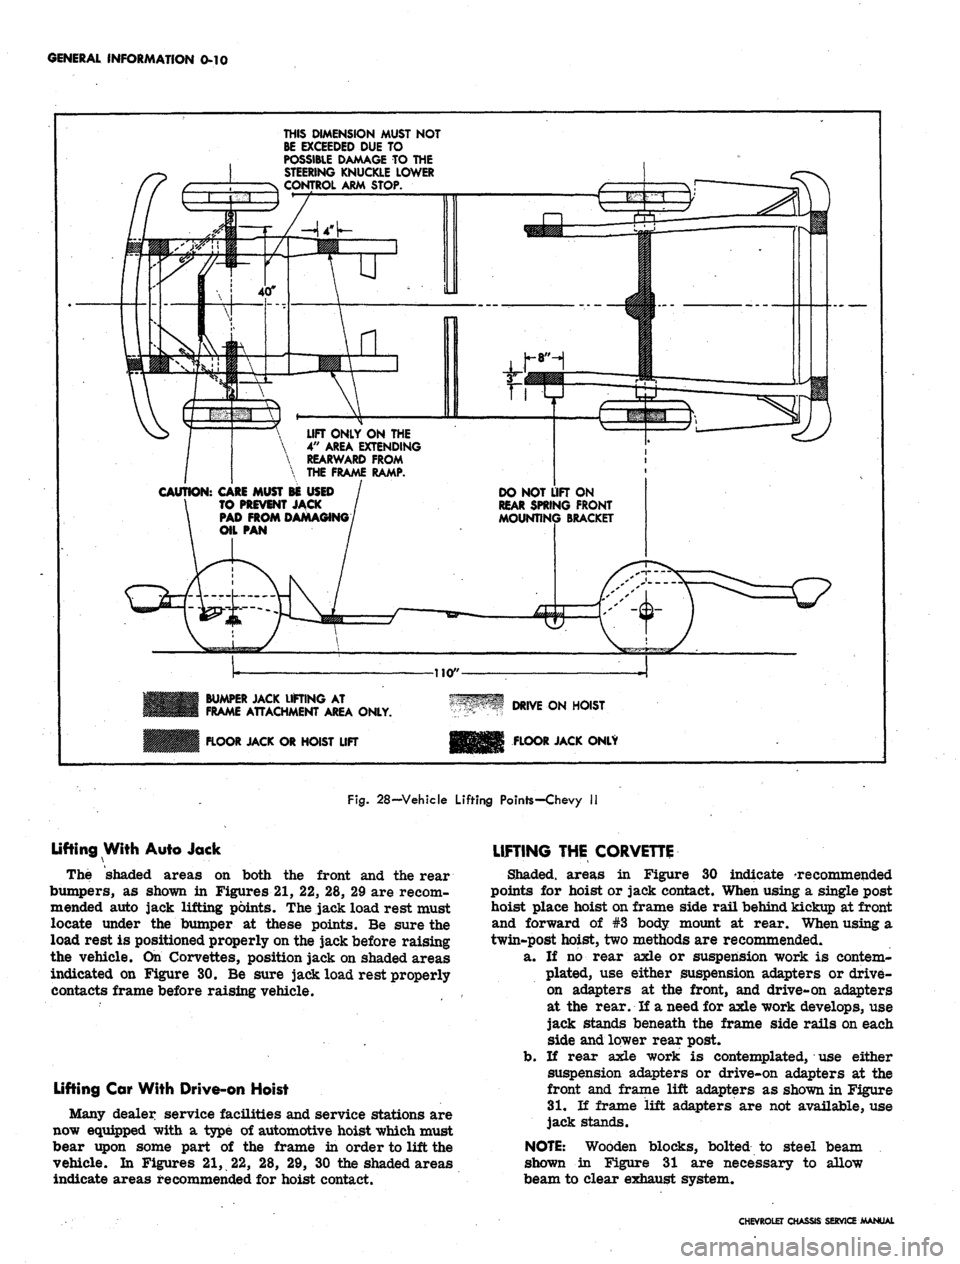 CHEVROLET CAMARO 1967 1.G Chassis Workshop Manual 
GENERAL INFORMATION 0-10

THIS DIMENSION MUST NOT

BE EXCEEDED DUE TO

POSSIBLE DAMAGE TO THE

STEERING KNUCKLE LOWER

CONTROL ARM STOP.

LIFT ONLY ON THE

4"
 AREA EXTENDING

REARWARD FROM

THE FRAM